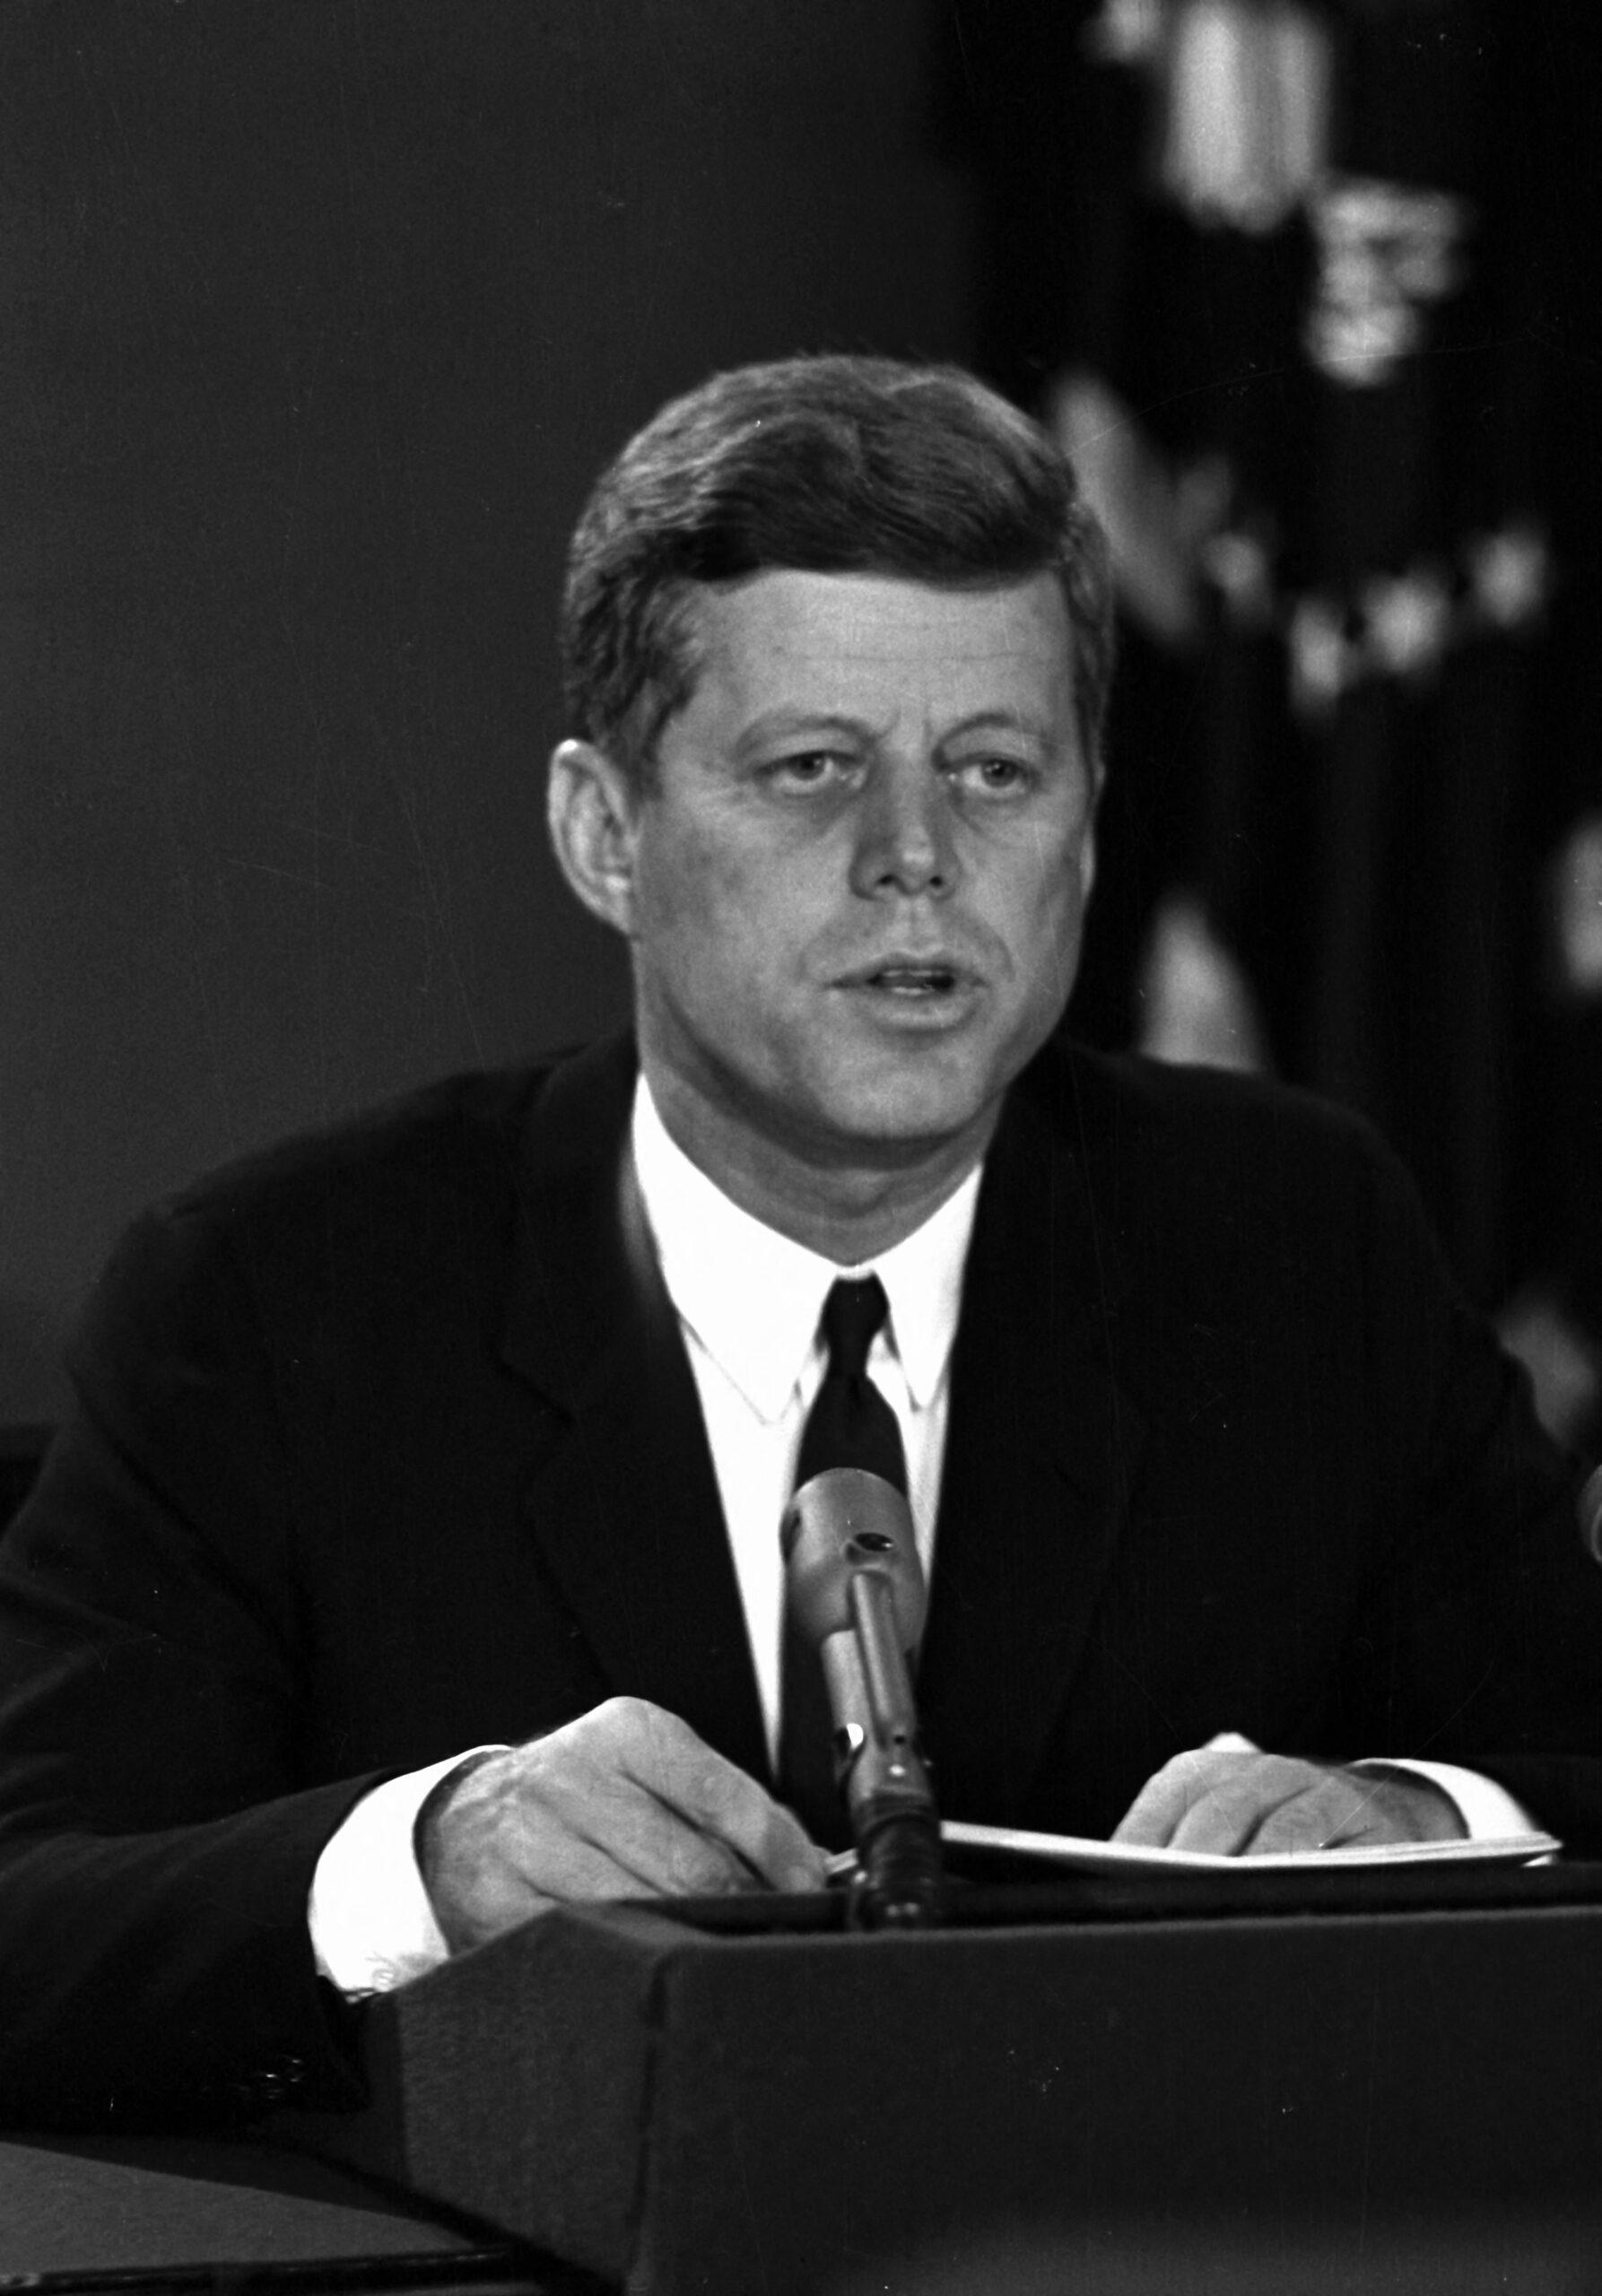 Kennedy Address on the Cuban Missile Crisis